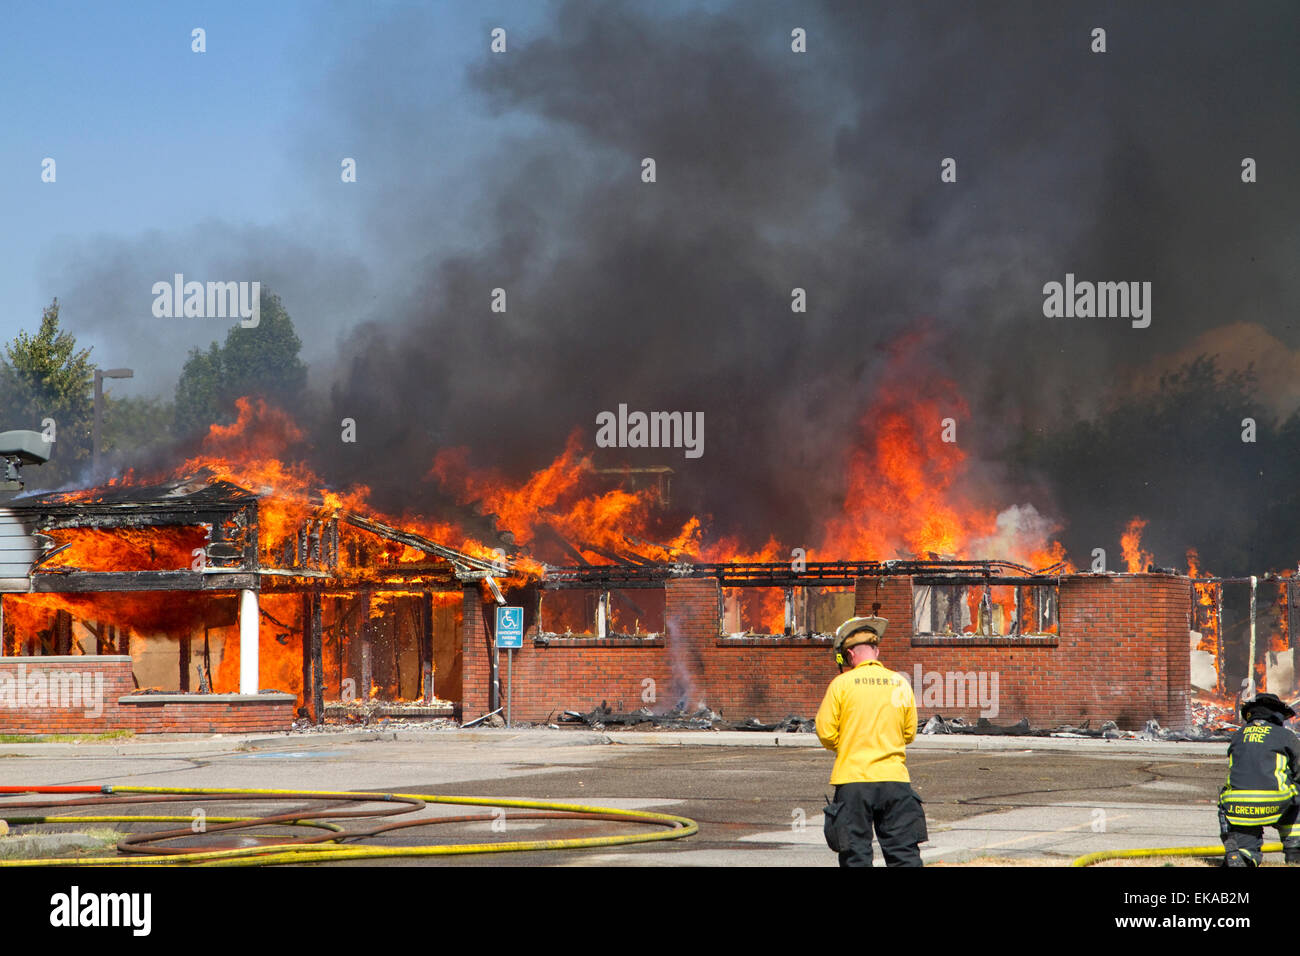 Fire fighters on the scene of a building fire in Boise, Idaho, USA. Stock Photo